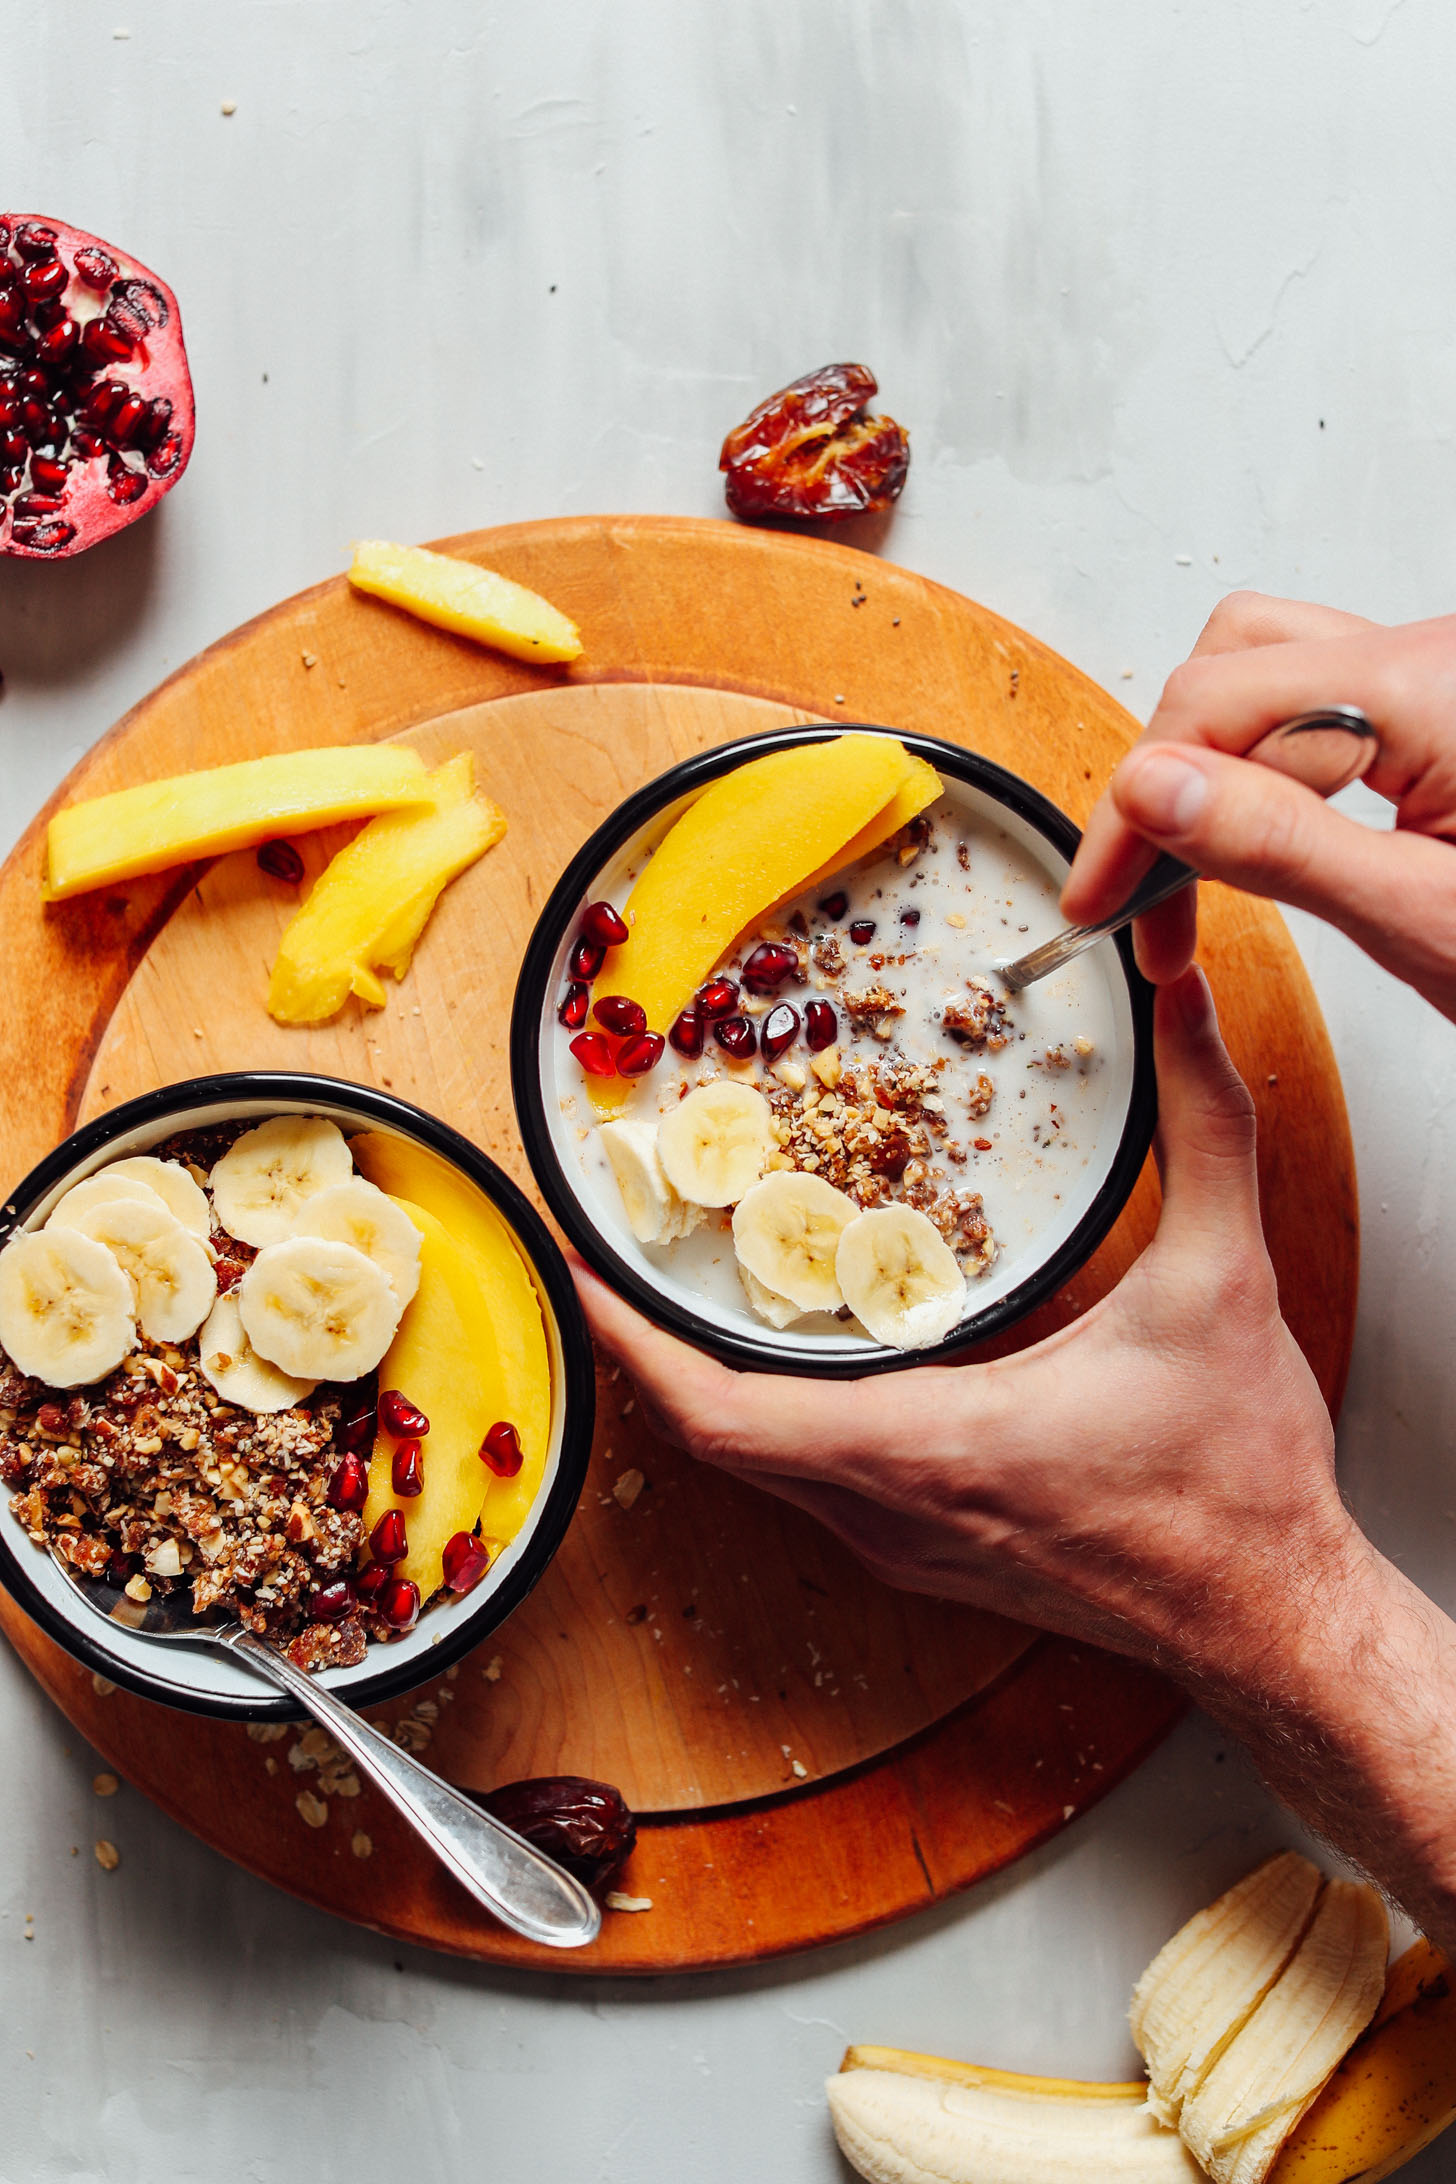 Wholesome bowls of gluten-free vegan granola served with coconut milk and fresh fruit